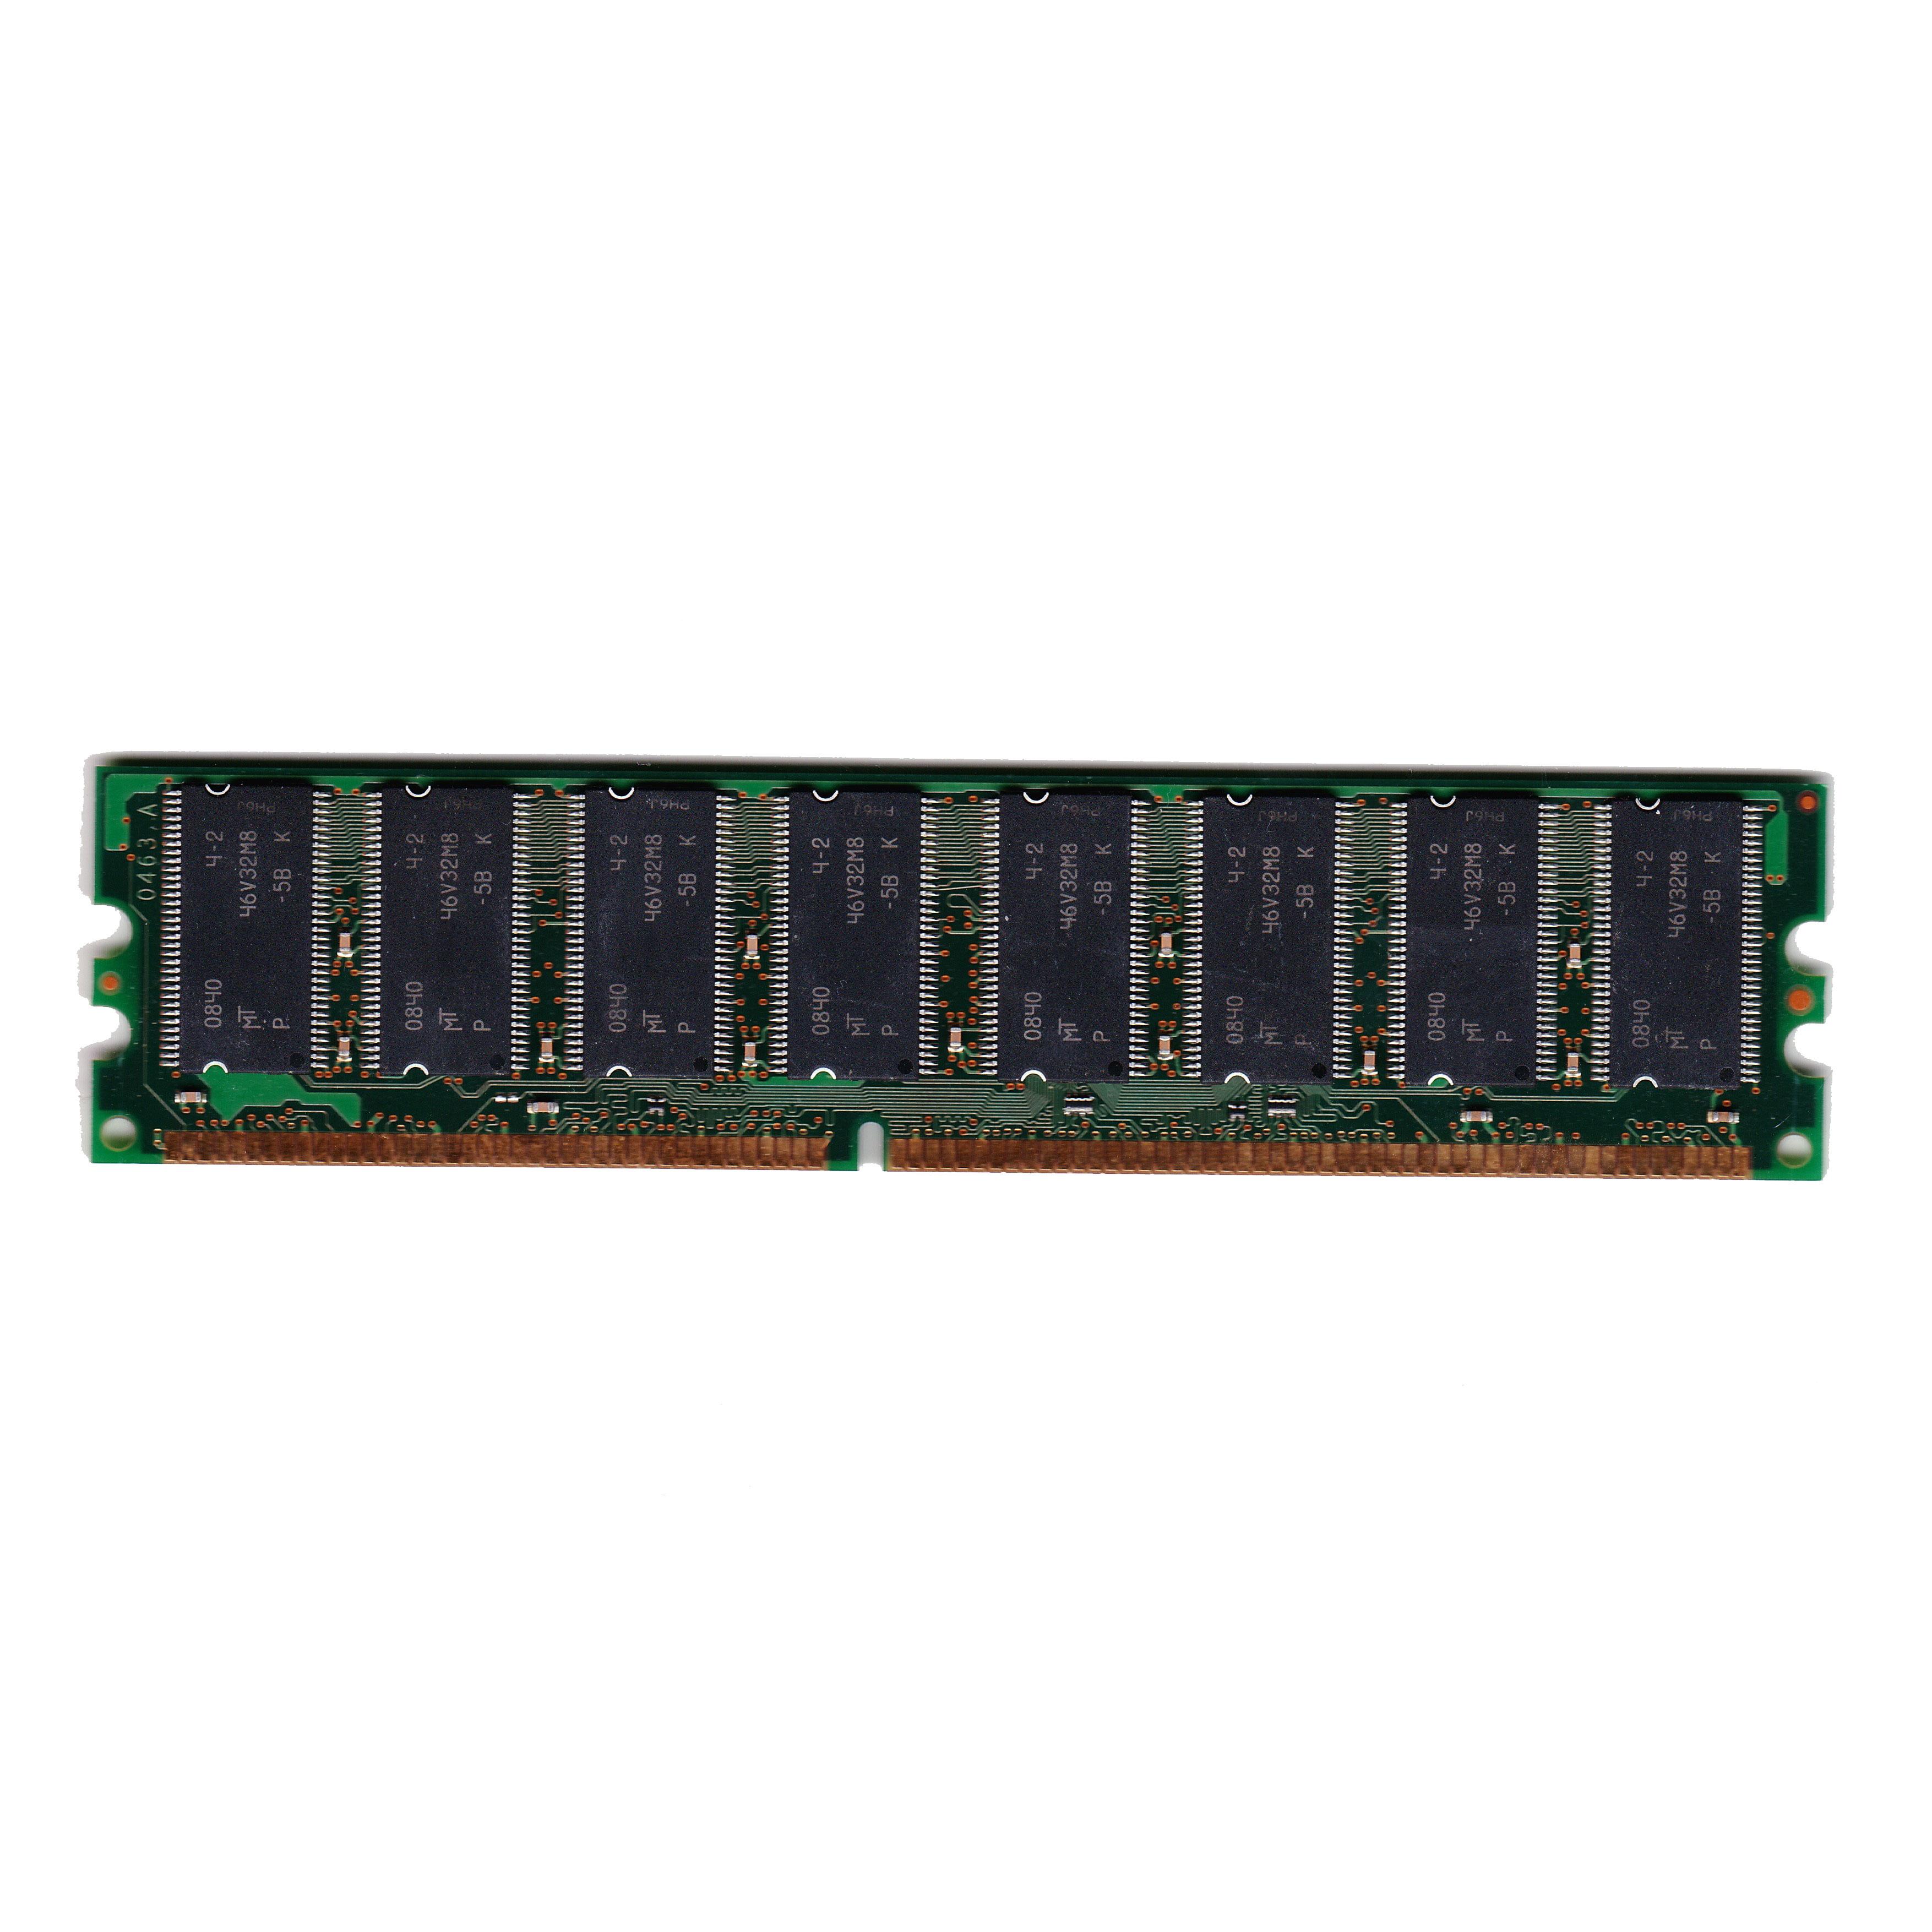 Untested CRUCIAL 512MB DDR 333 CL2.5 RAM - Upgrade Legacy Systems!